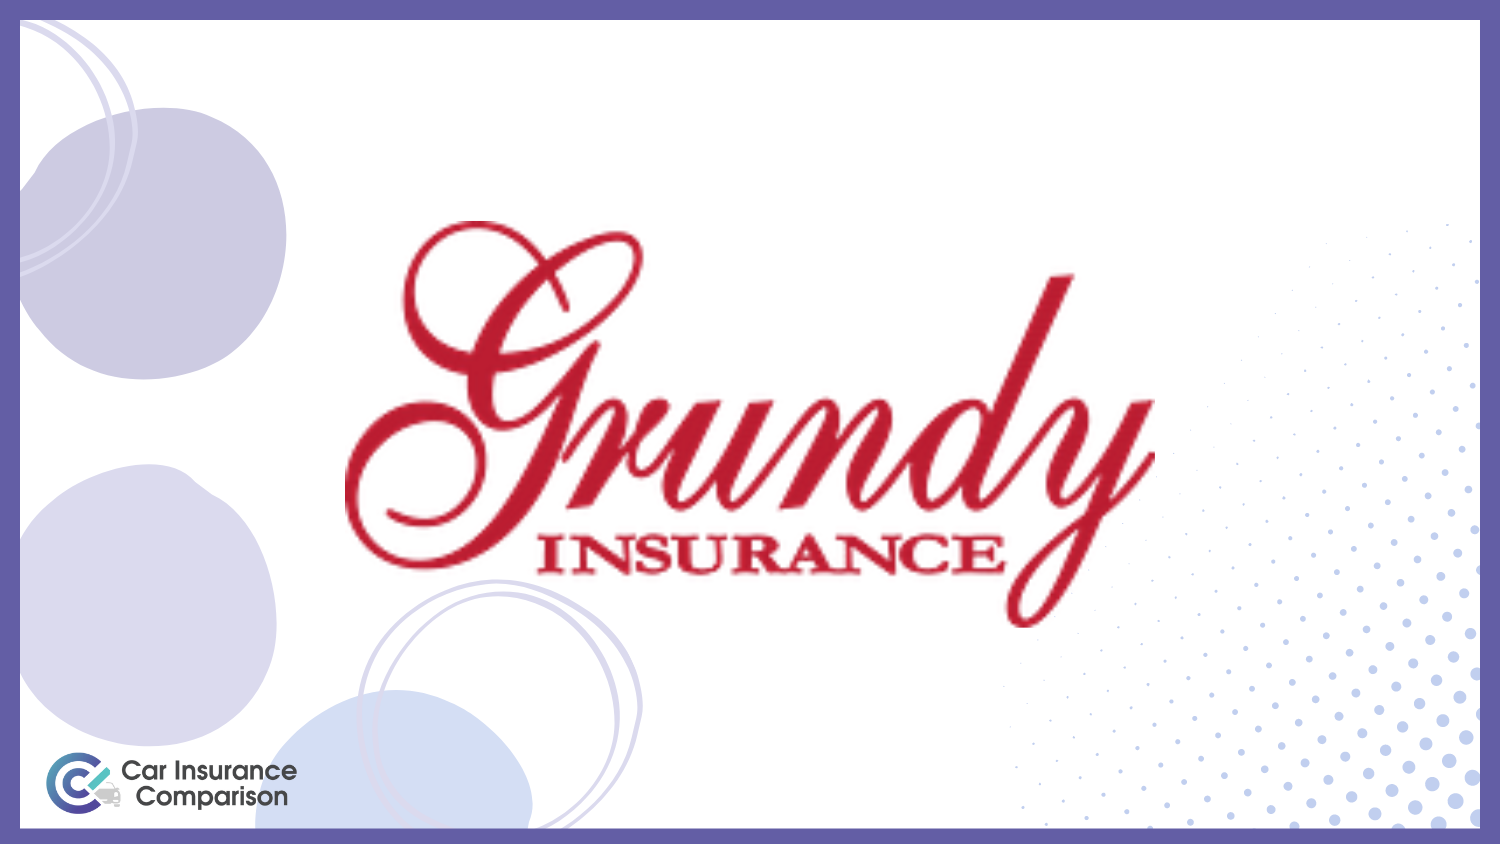 Grundy: Best Car Insurance for Specialty Vehicles